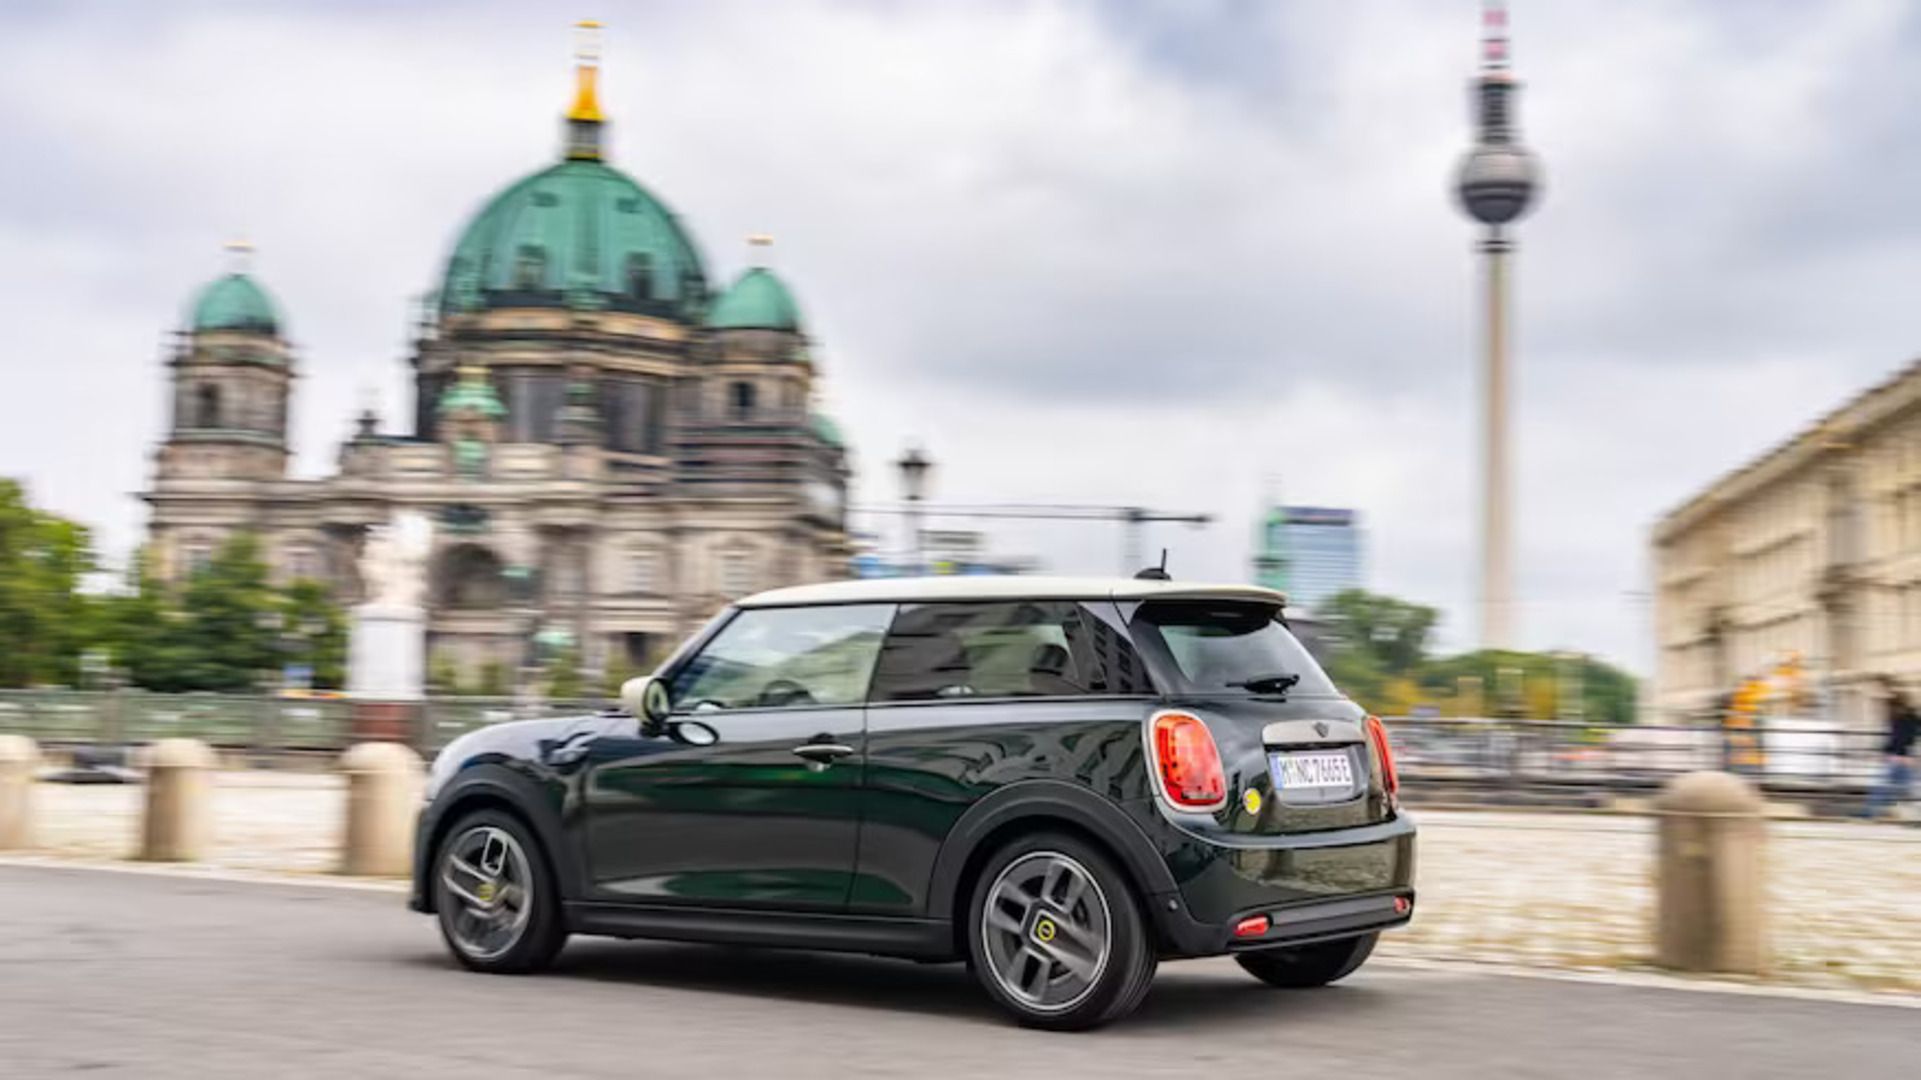 10 Things To Know About The Mini Cooper SE Electric